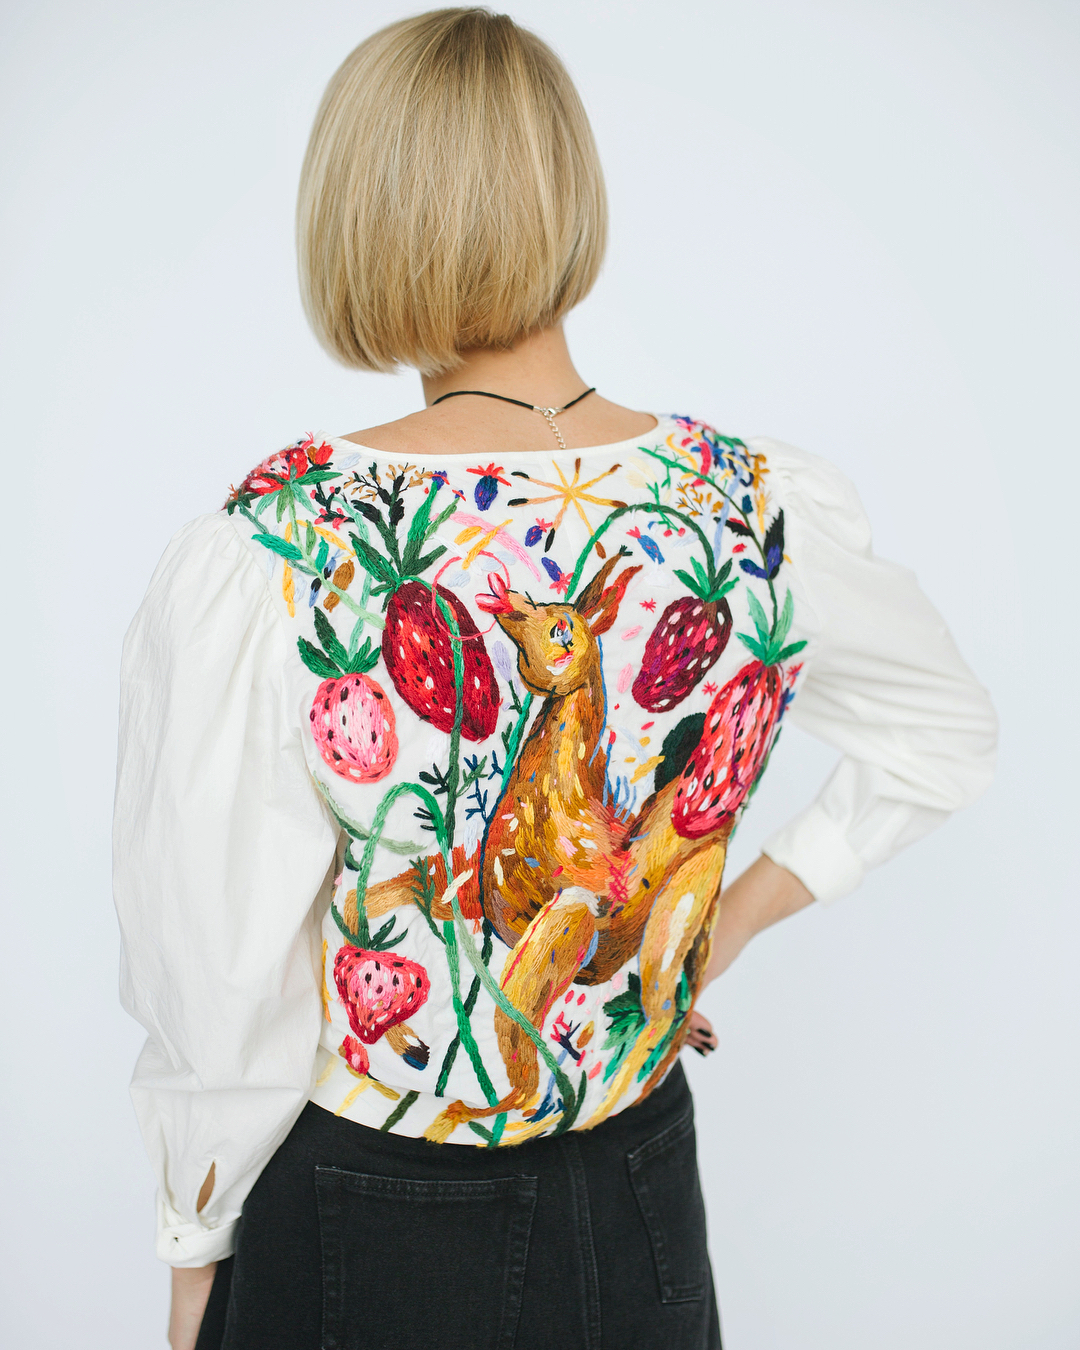 Colorful Custom Embroidered Clothing by Lisa Smirnova